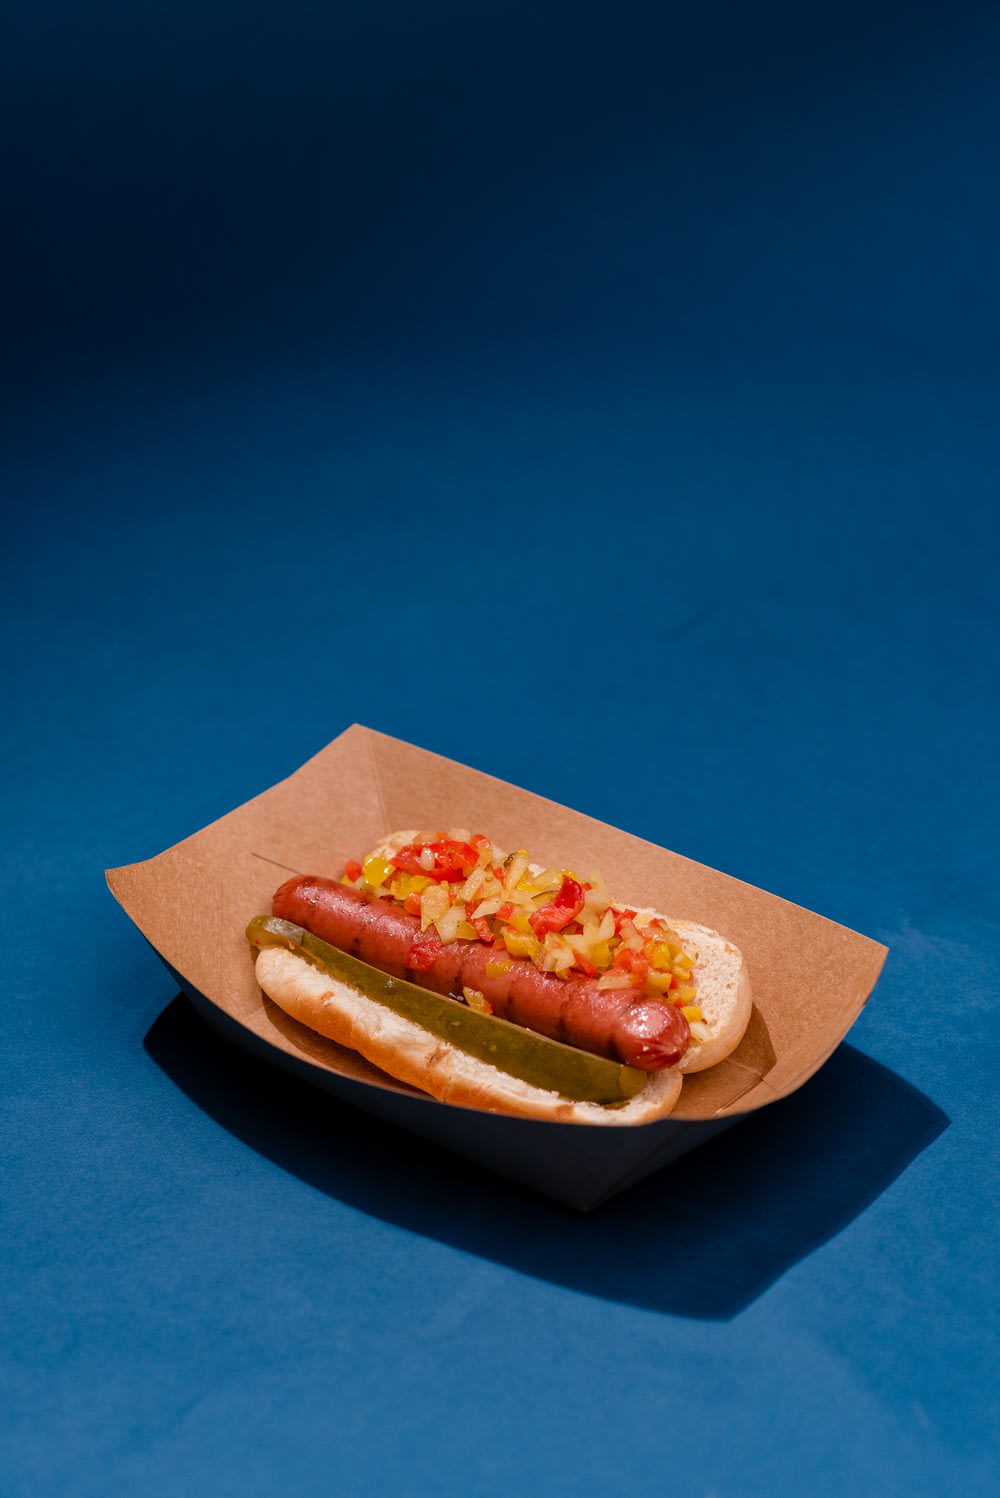 a hot dog with relish and mustard on a bun